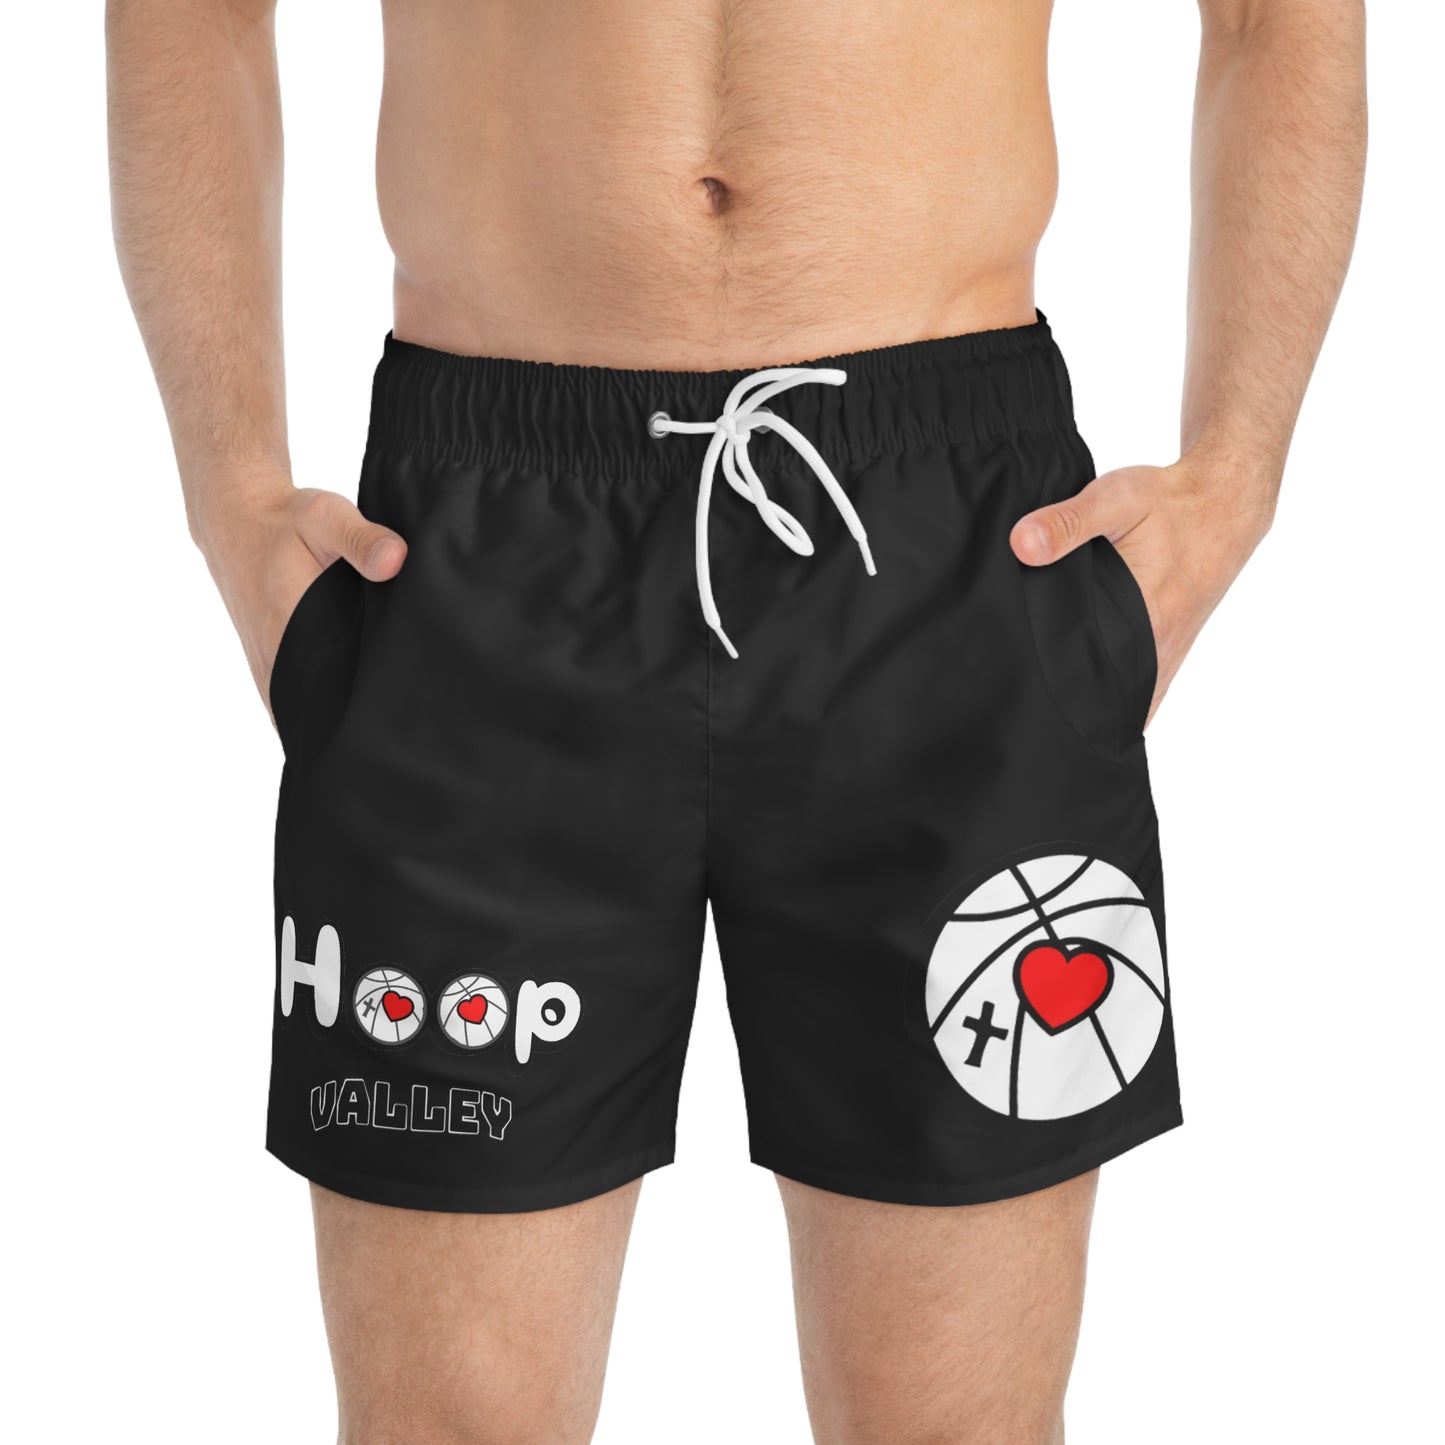 Hoop Valley Black With White Logo